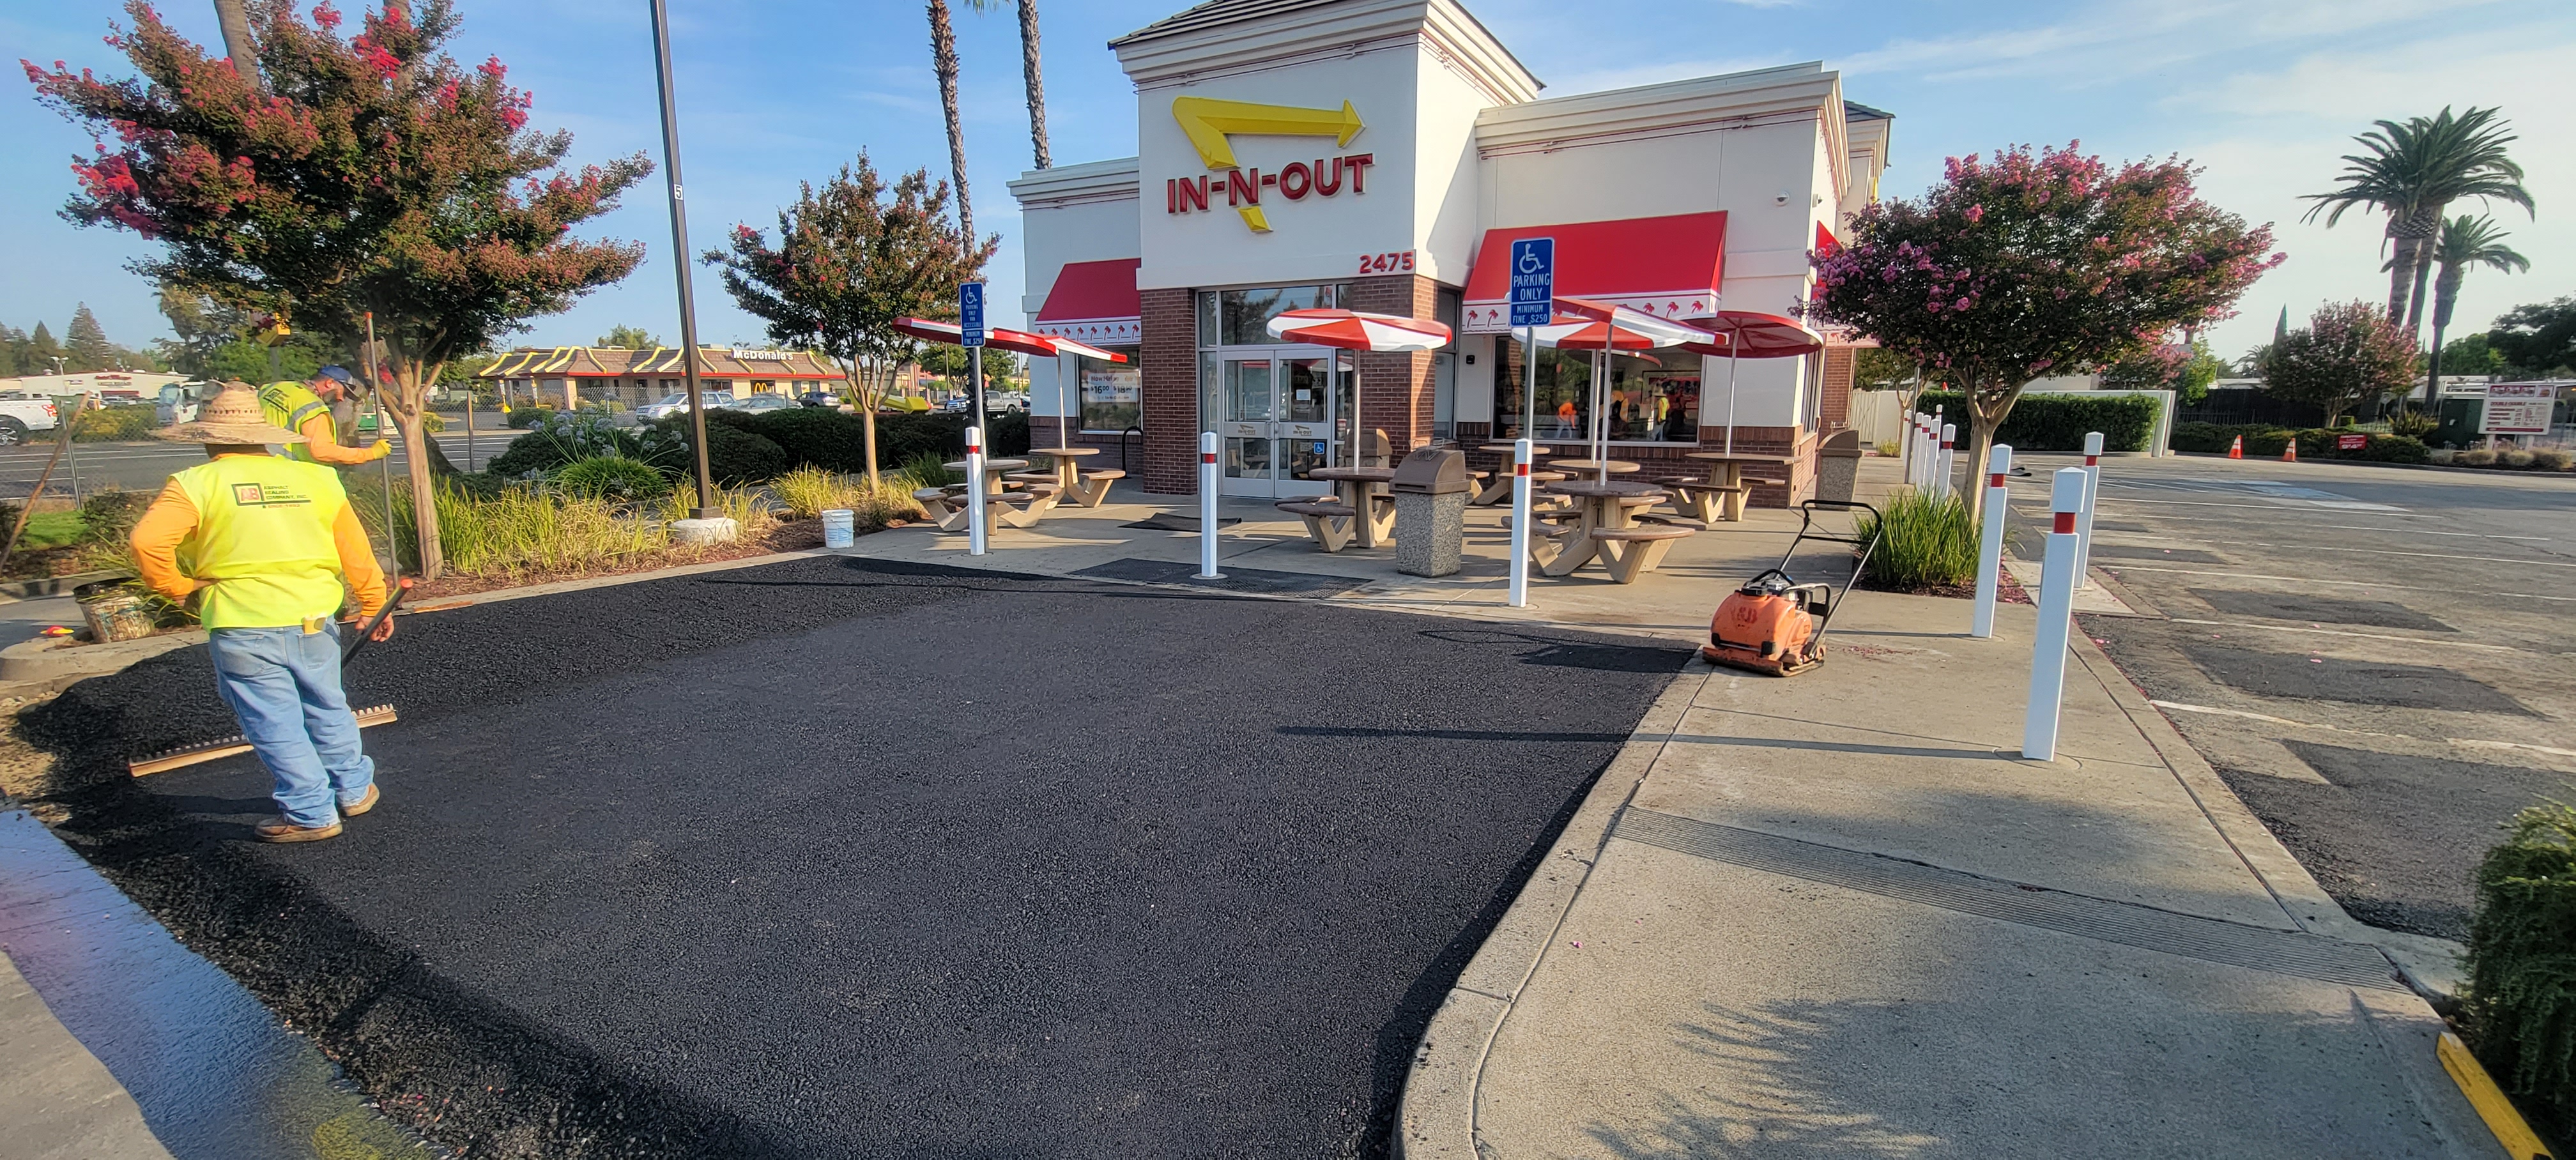 ADA Pad Upgrade at In N Out